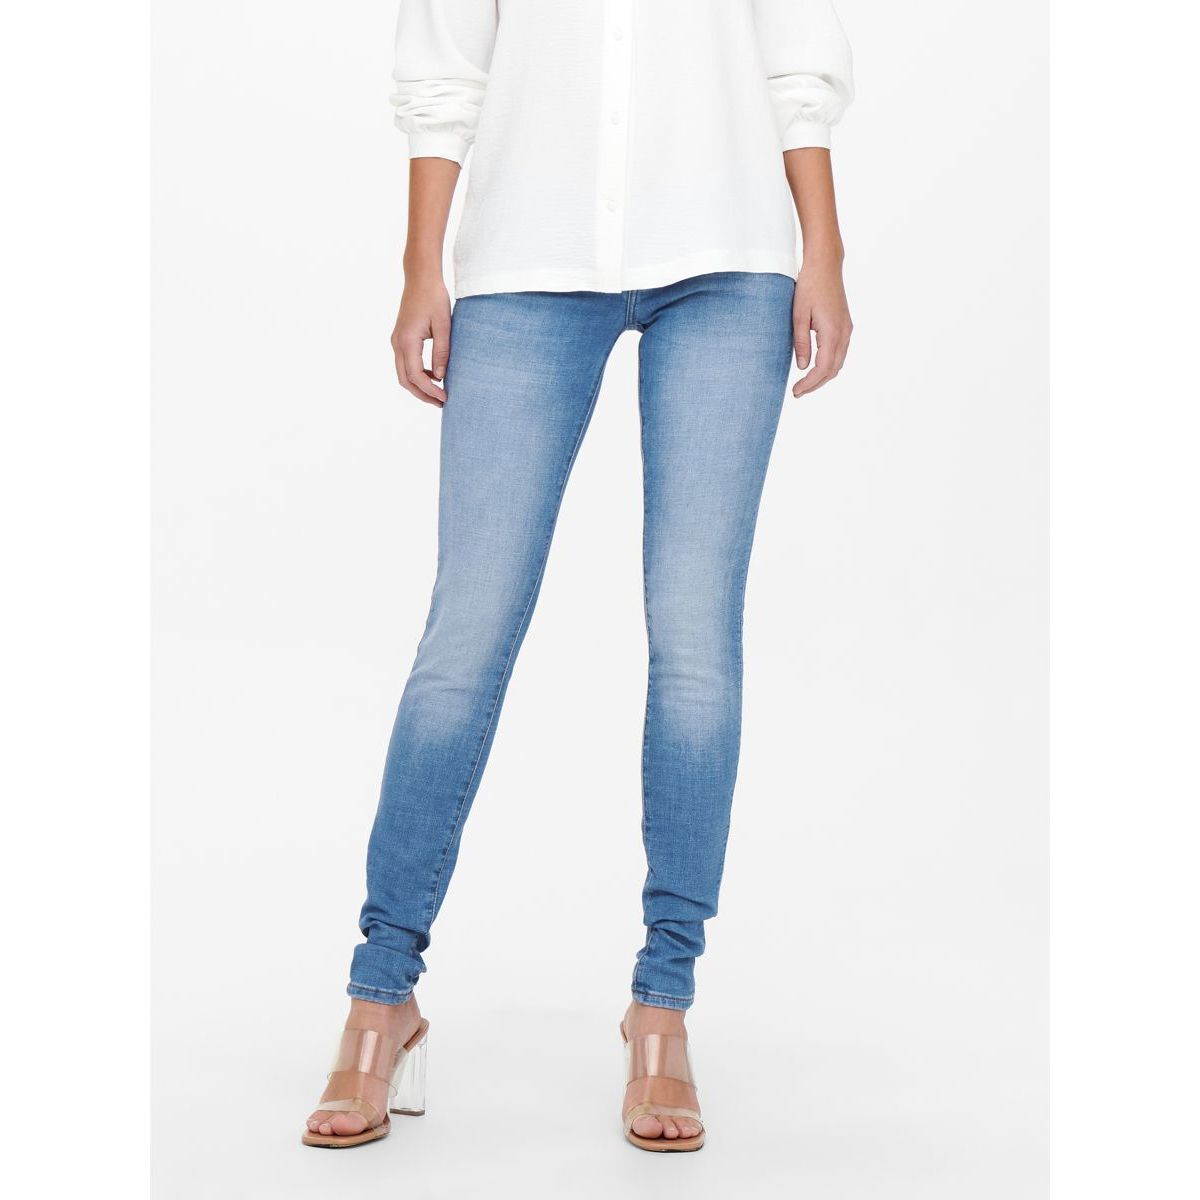 Mode Jeans Jeans taille basse Mangano Jeans taille basse bleu style d\u00e9contract\u00e9 